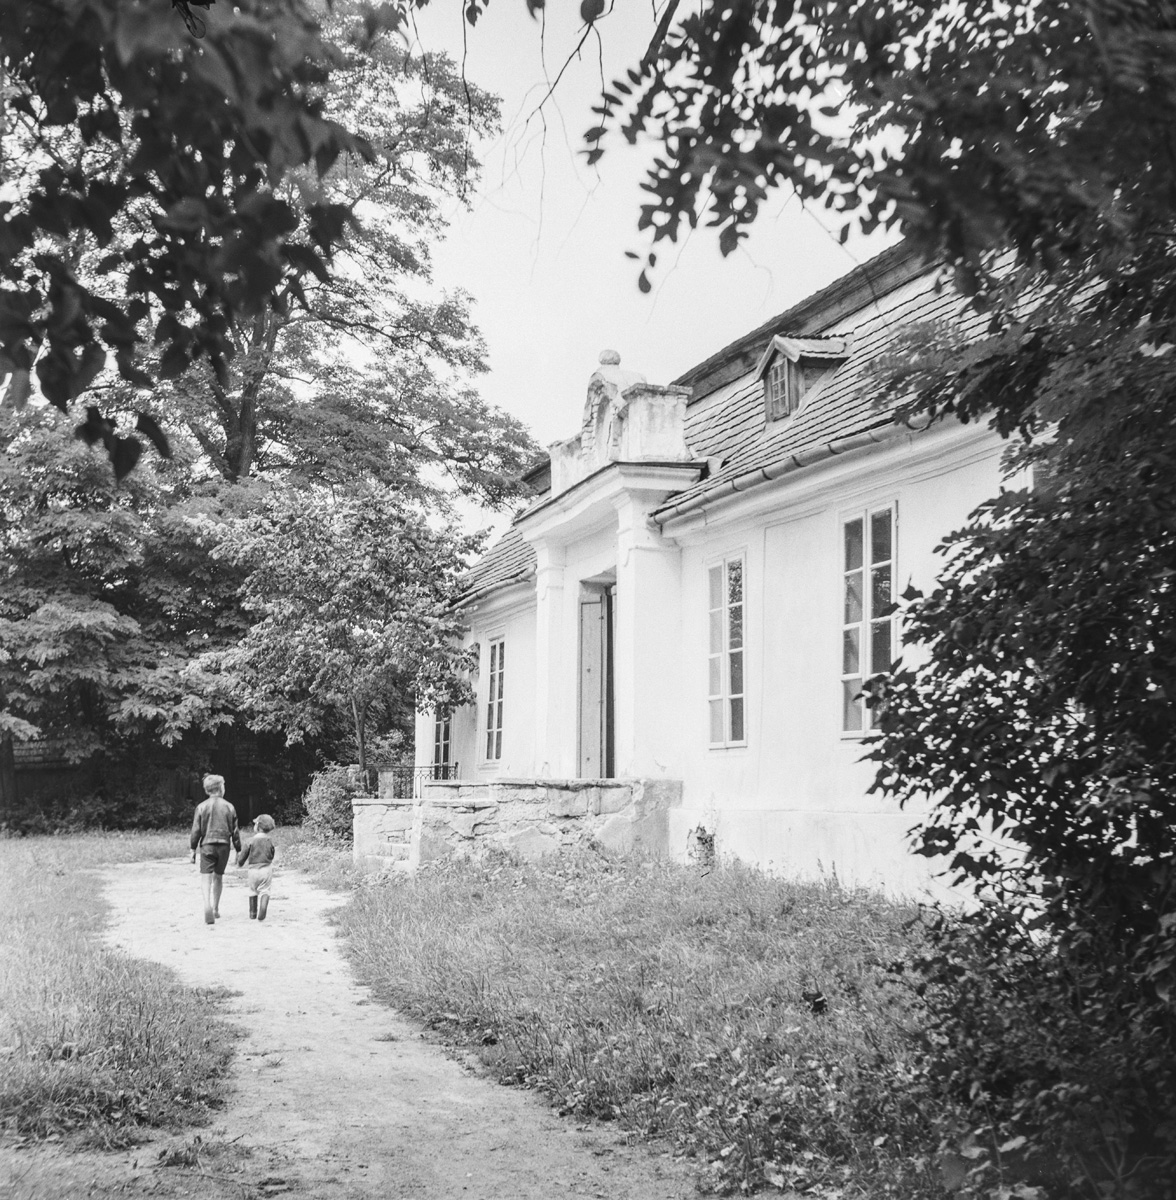 Entrance to the manor house – with boys